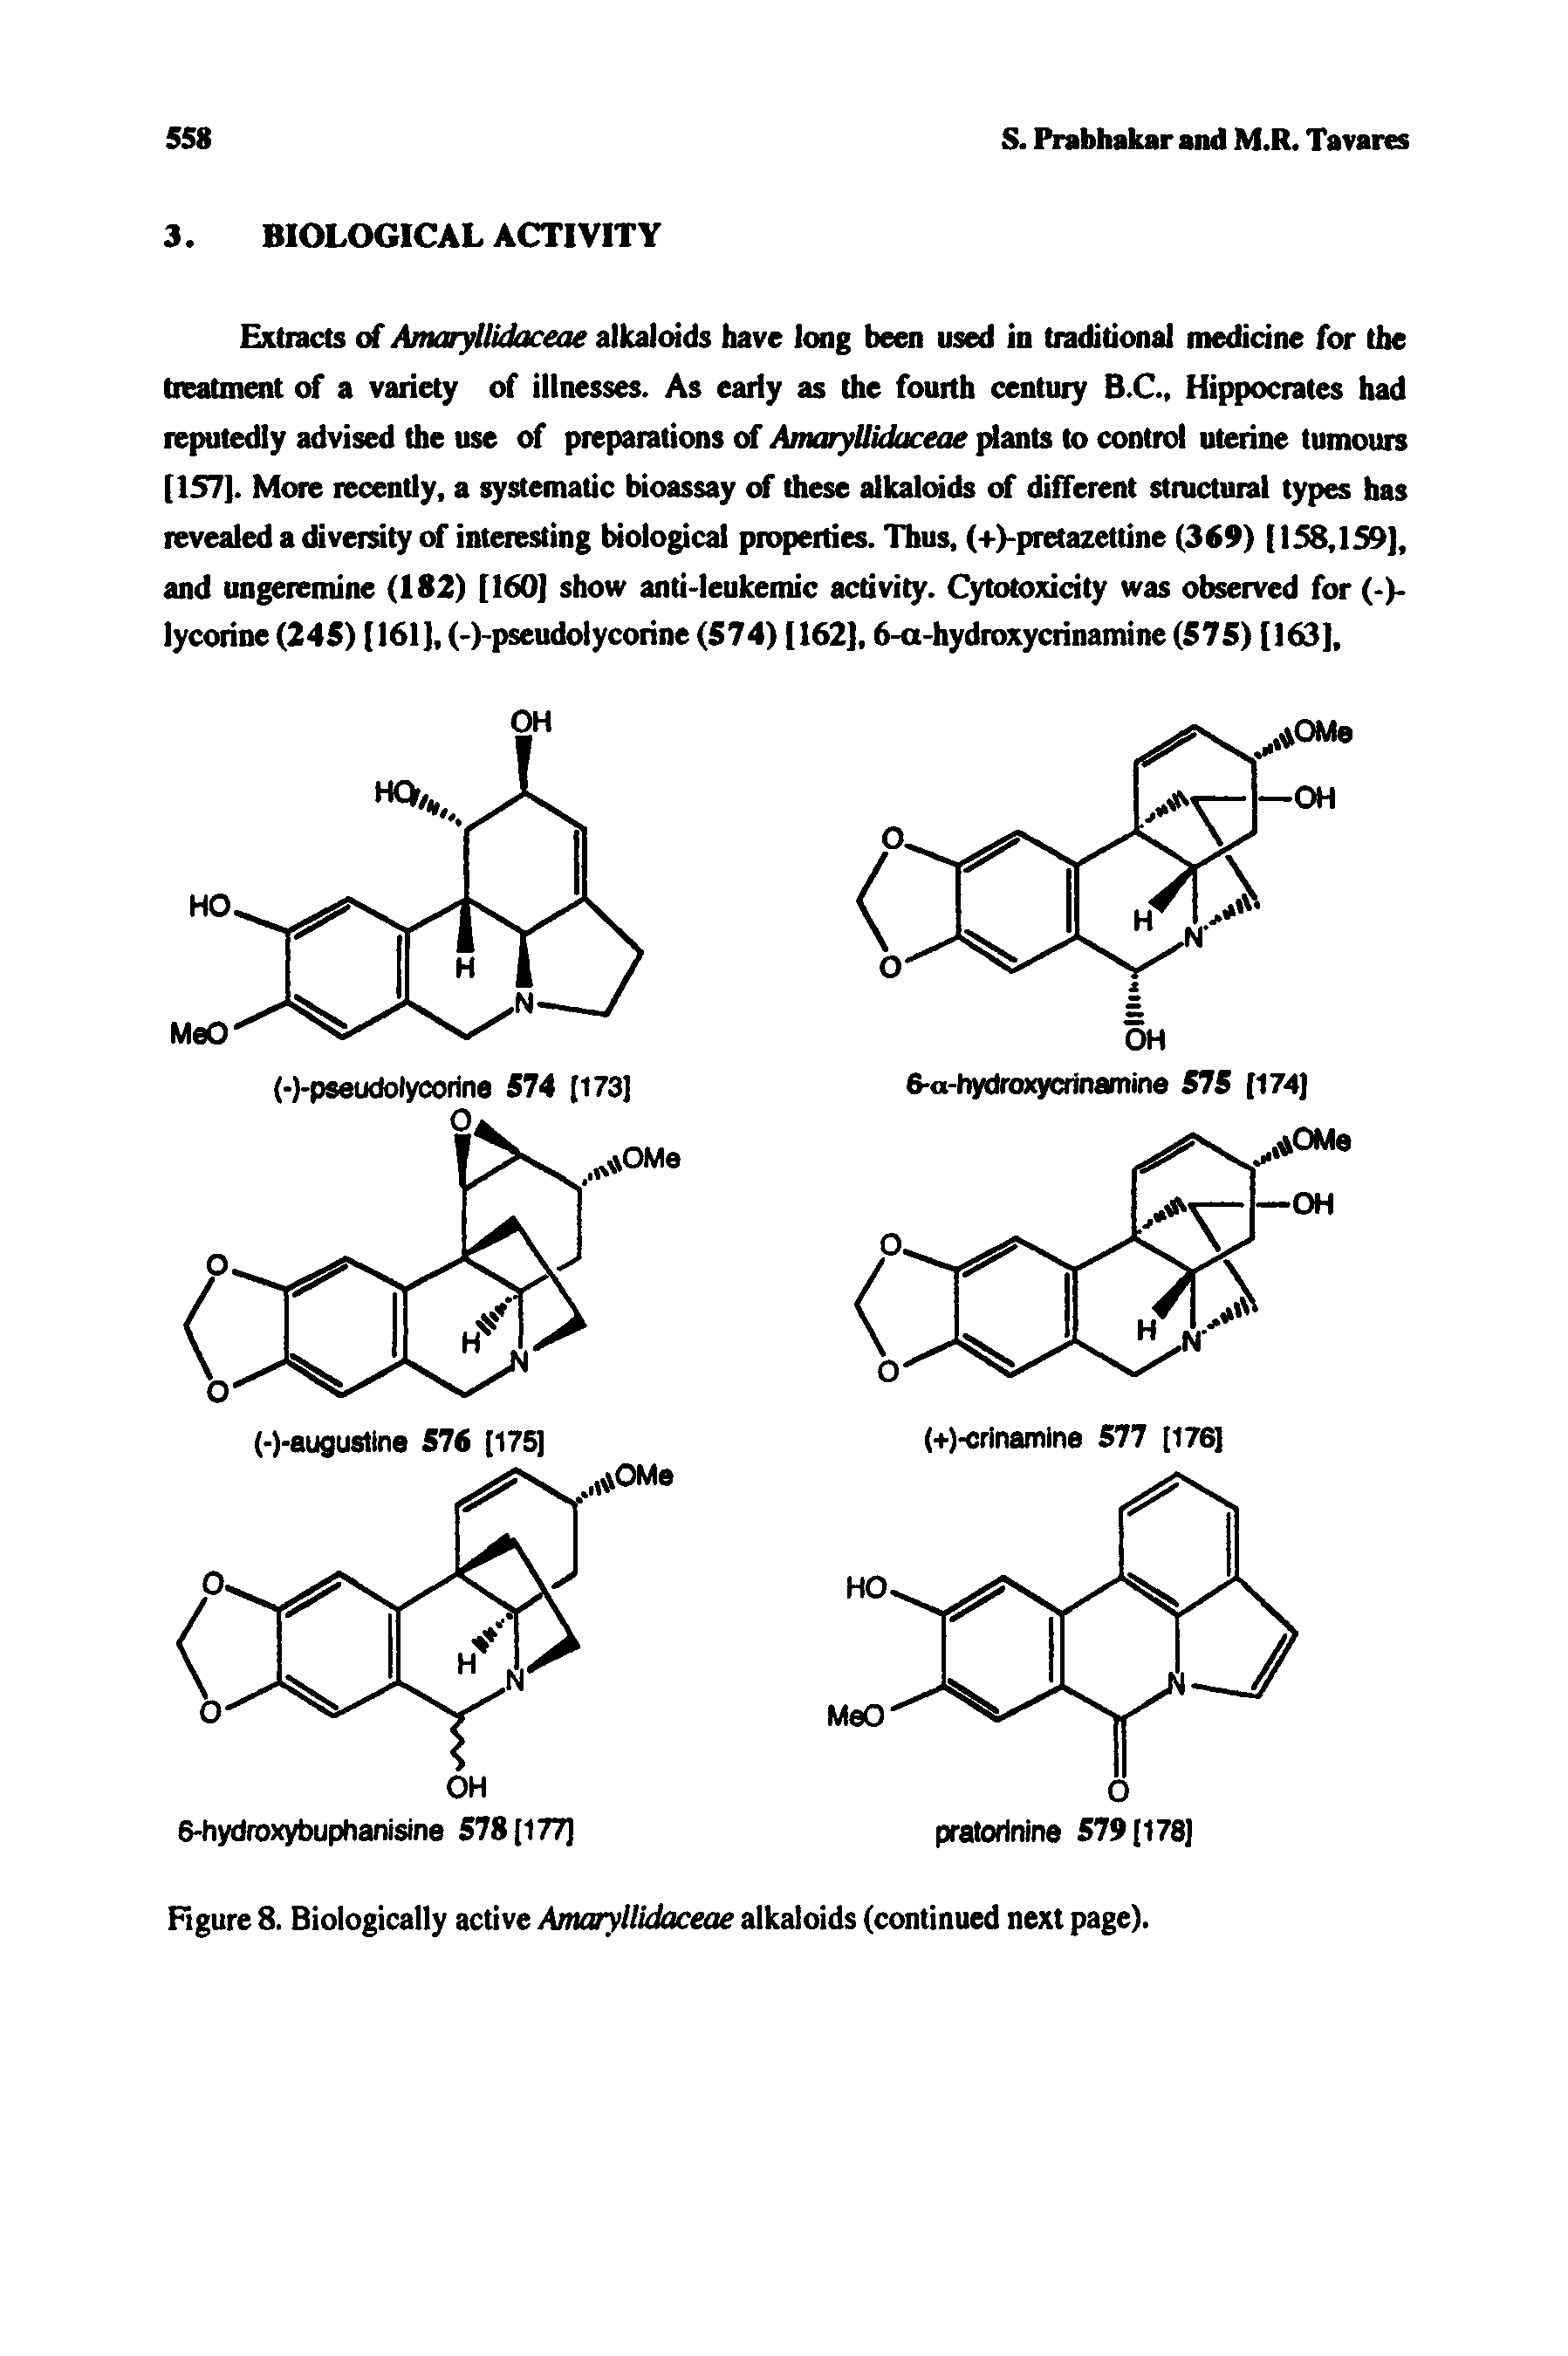 Figure 8. Biologically active Amaryllidaceae alkaloids (continued next page).